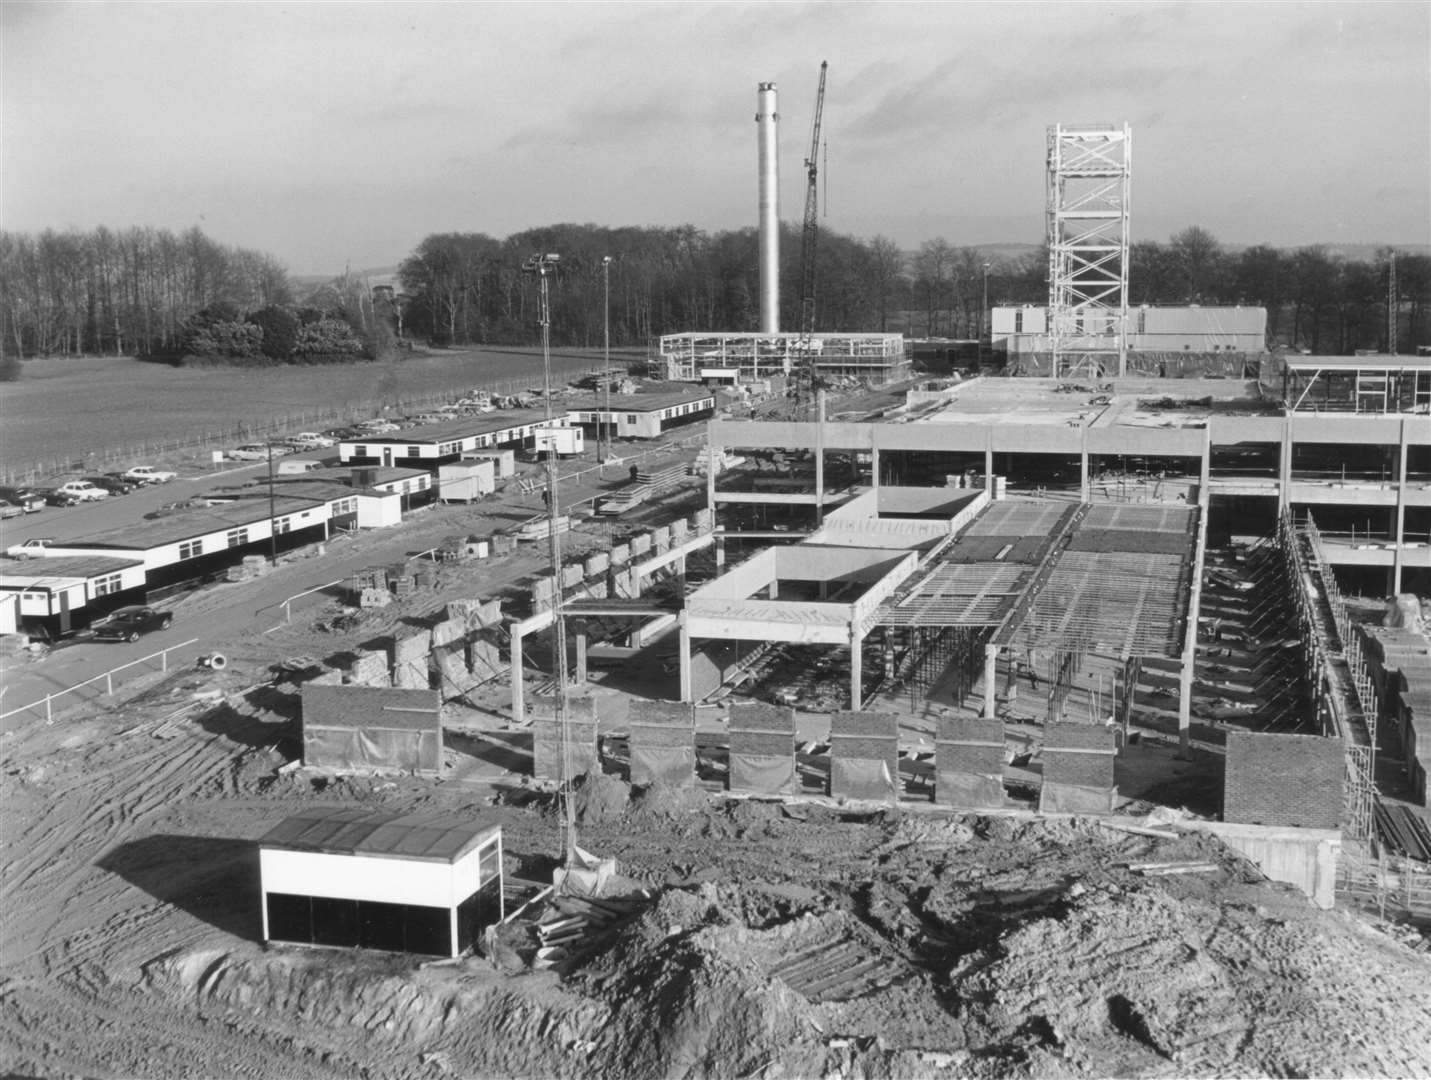 1976 - William Harvey Hospital under construction showing the outpatients department from the nursing quarters